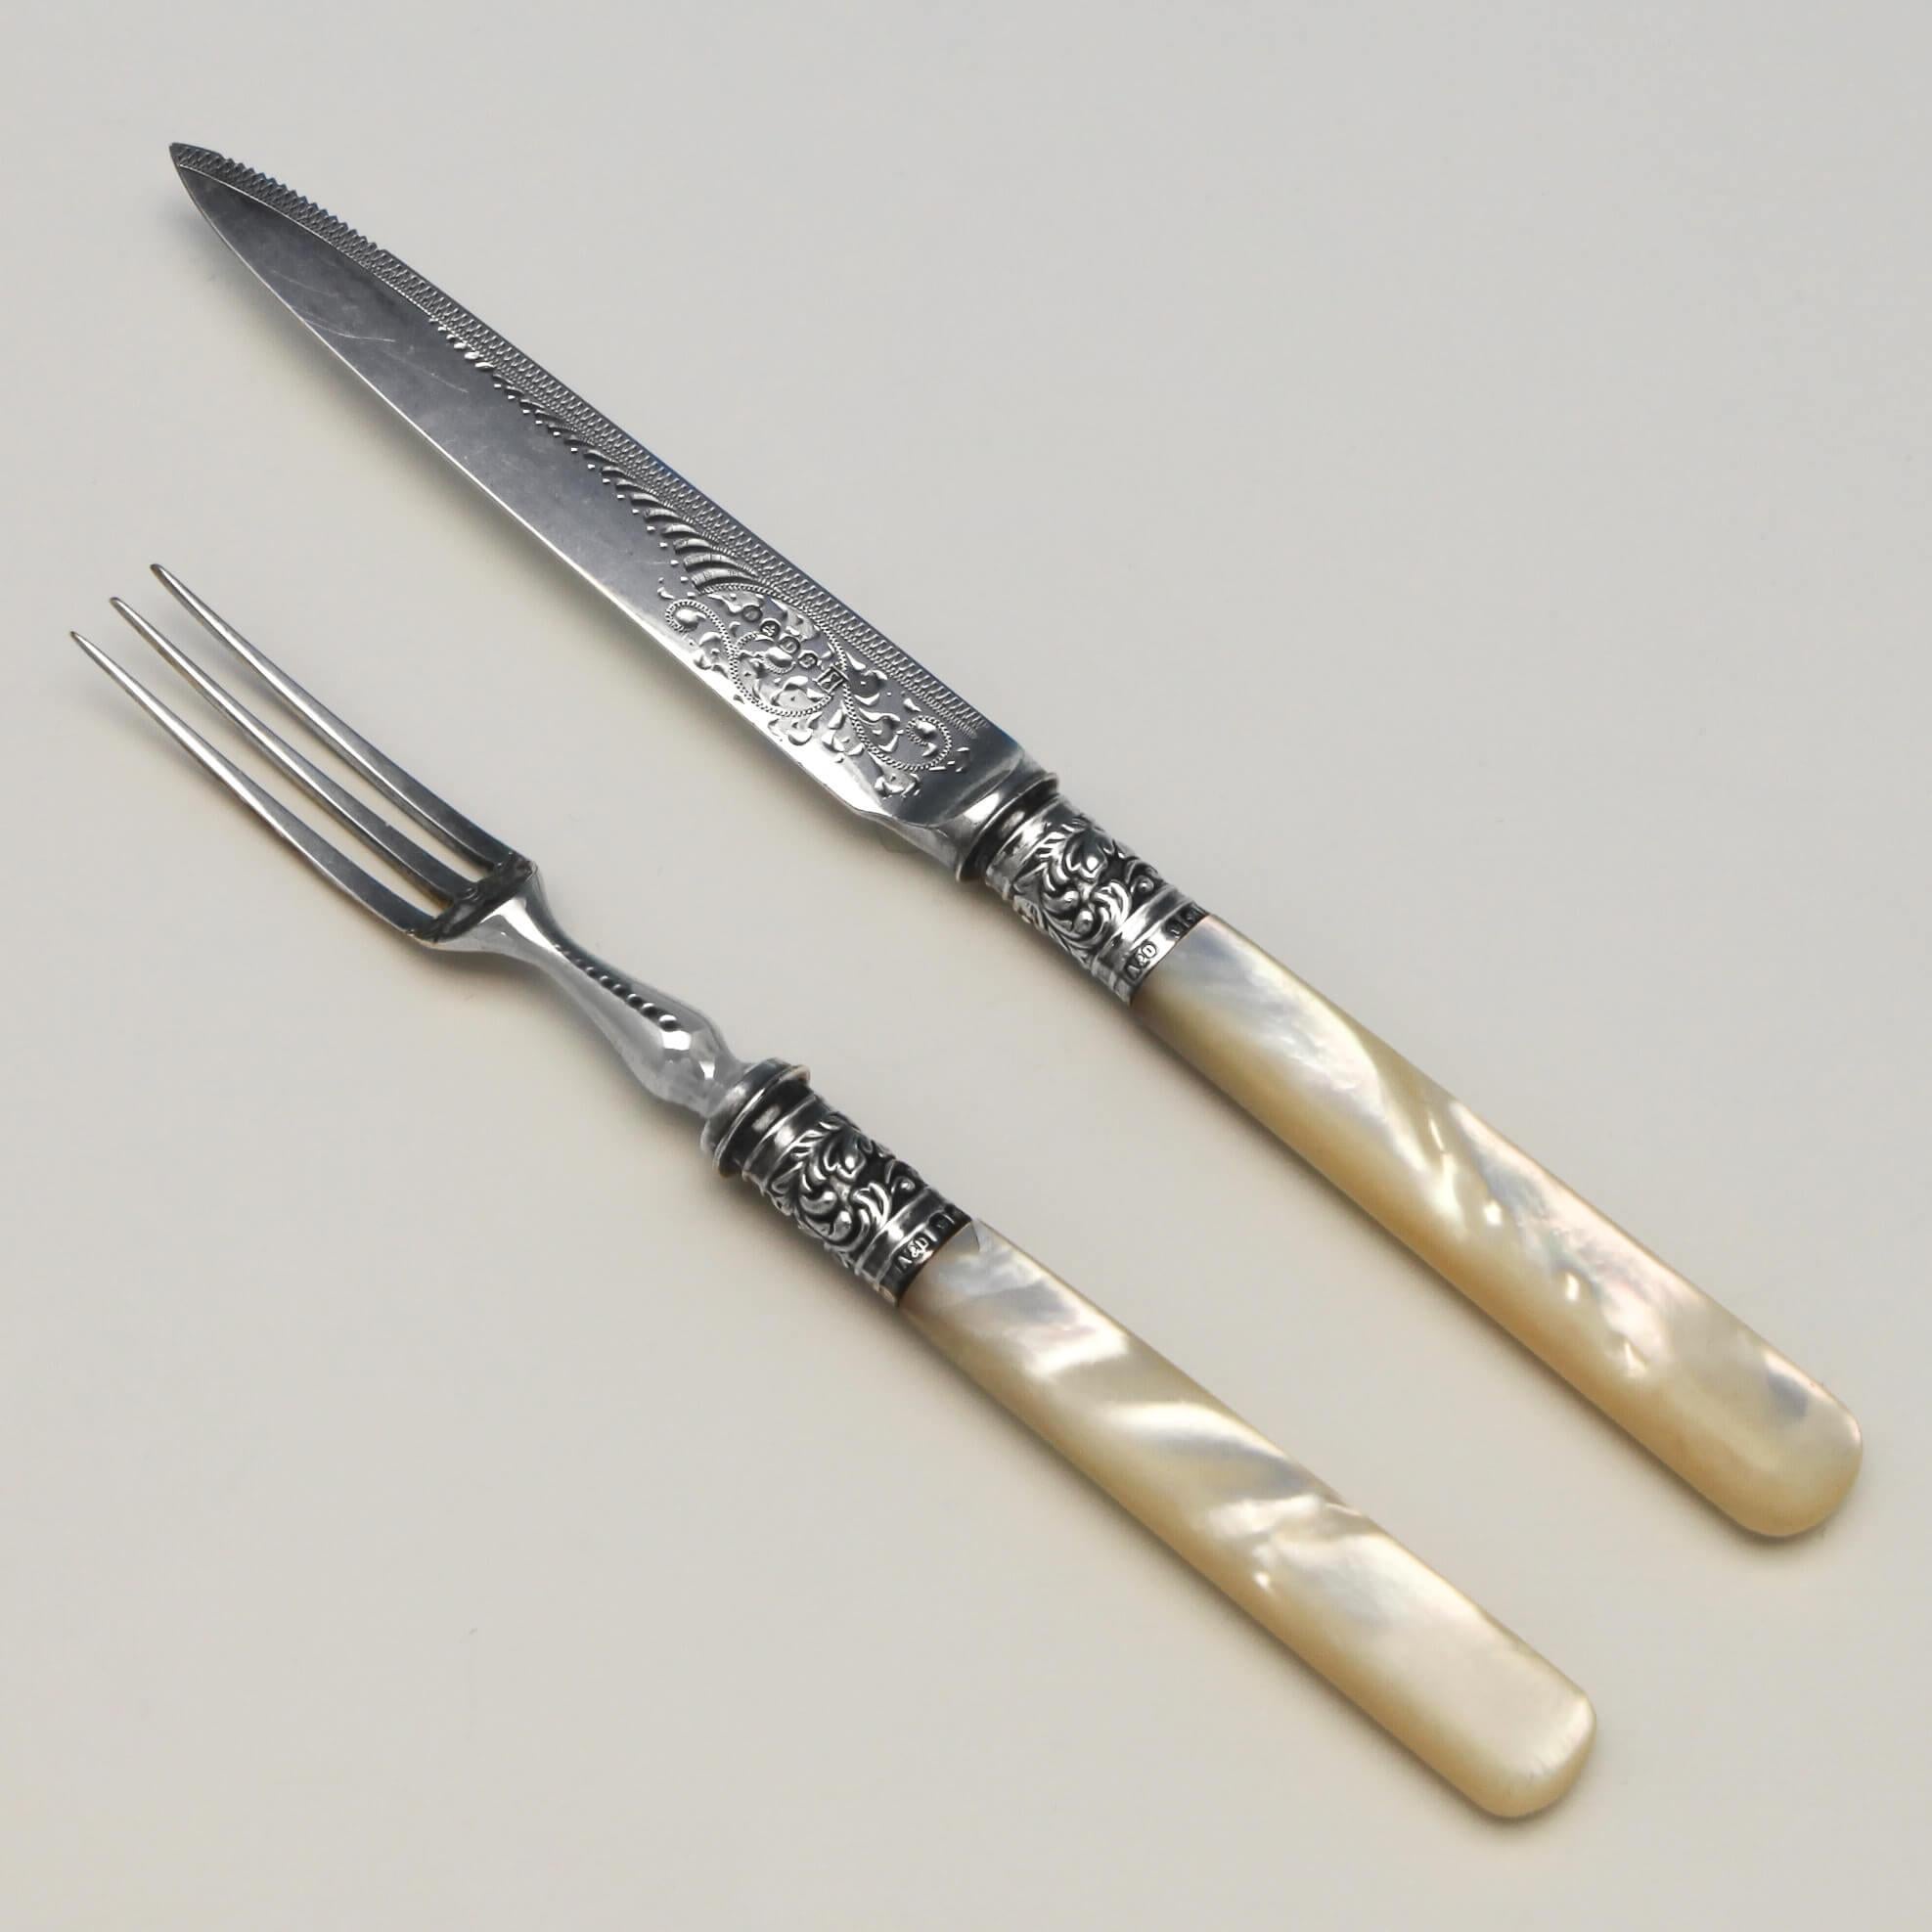 Hallmarked in Sheffield in 1911 by Allen & Darwin, this stunning, Victorian, antique sterling silver dessert set, features mother of pearl handles, engraved silver plated blades and tines, chased sterling silver ferrules, and is presented in a